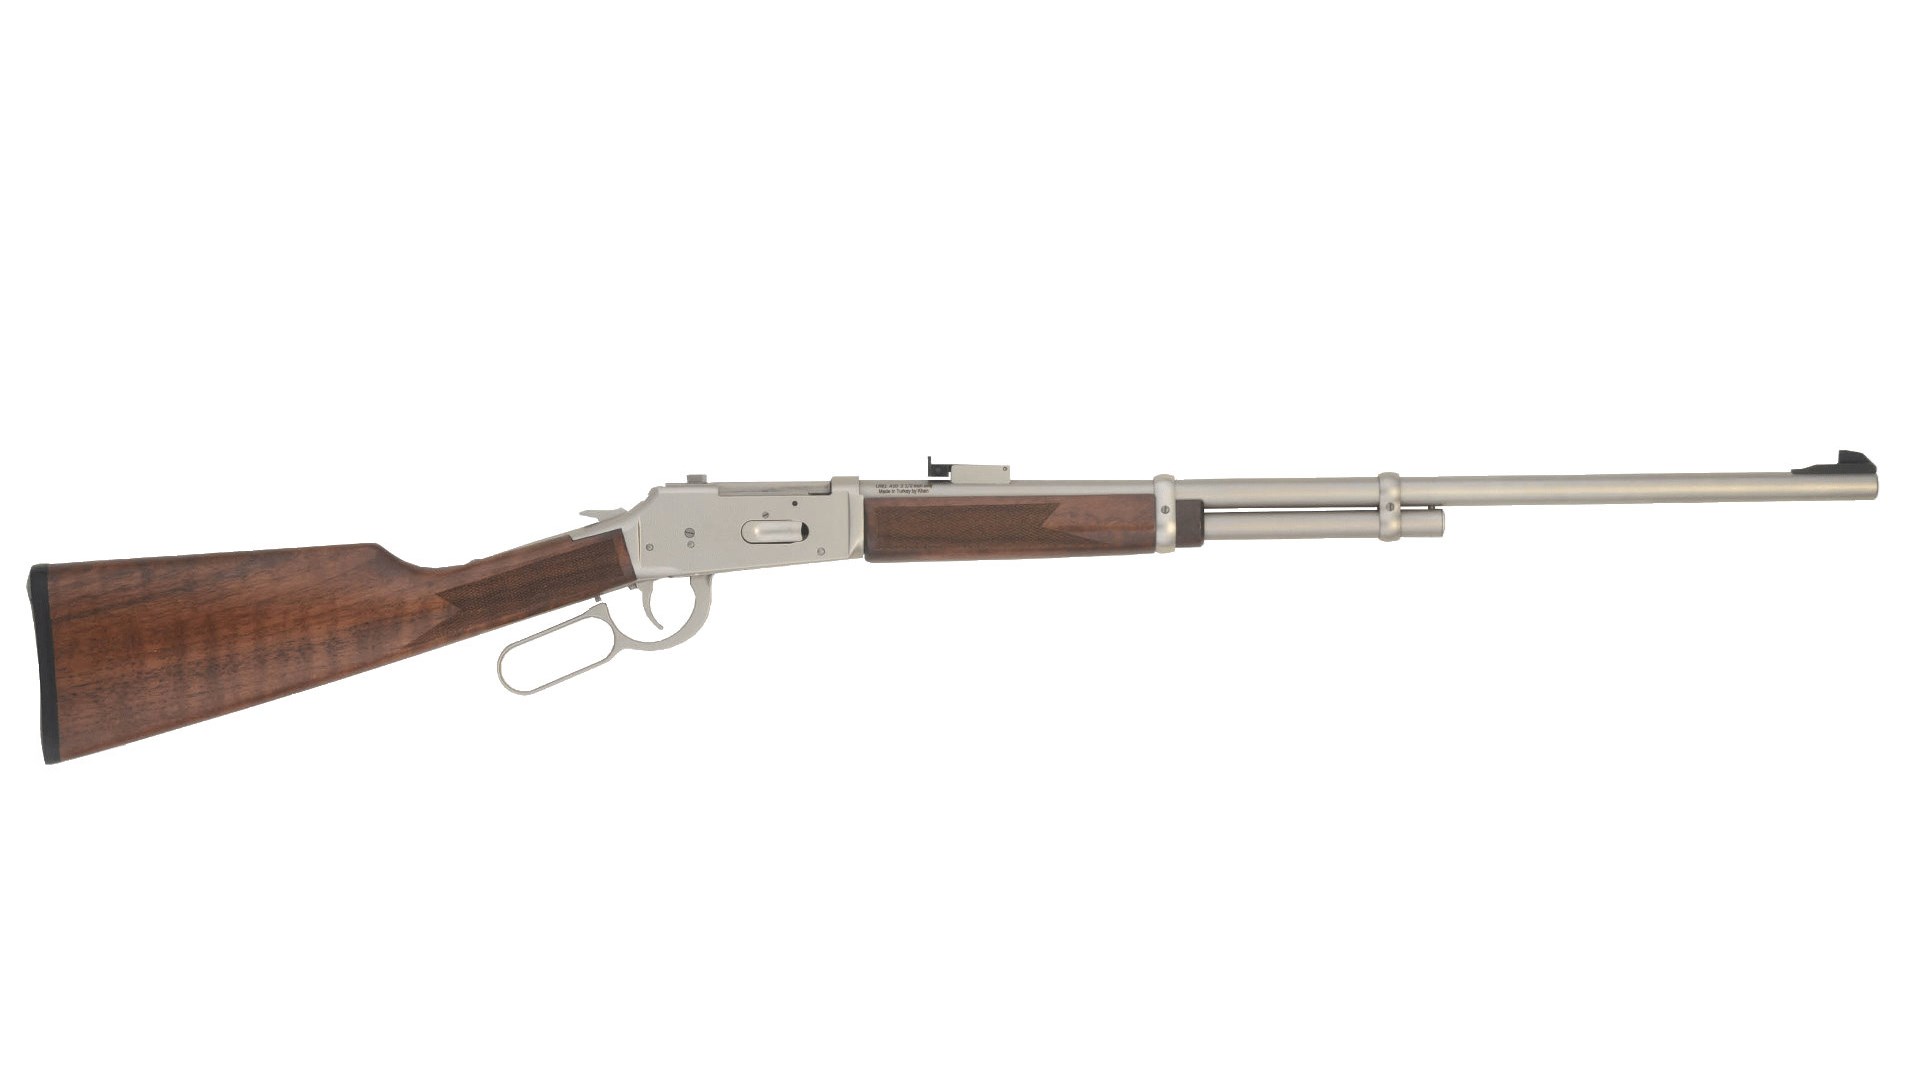 A TriStar Arms LR94 lever-action .410 shotgun shown with a nickeled finish.